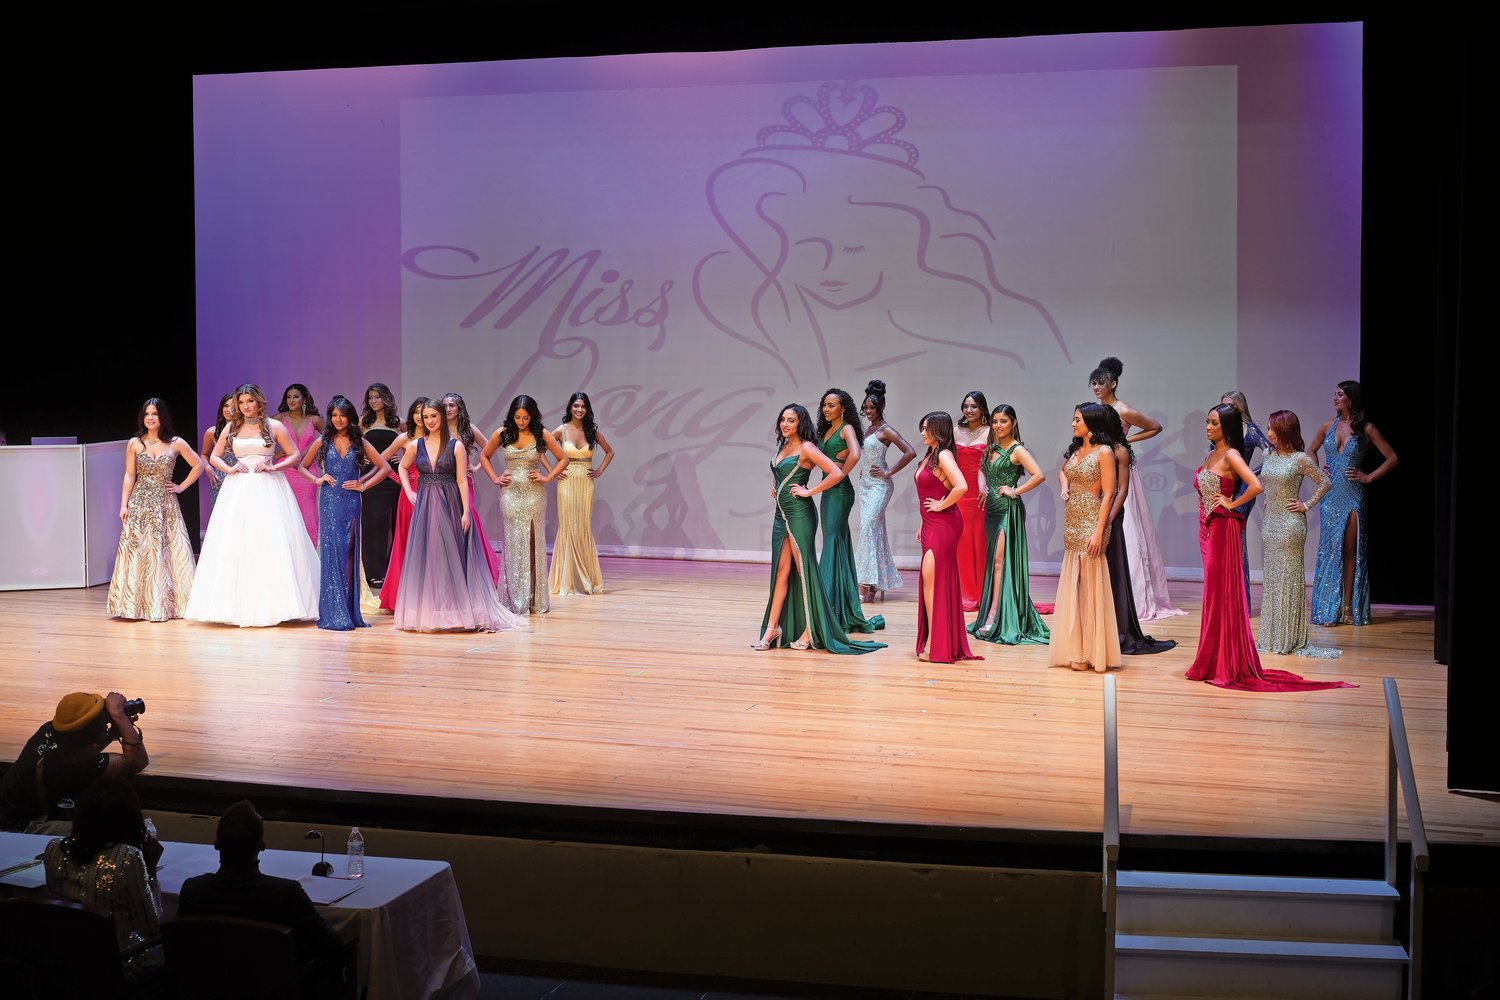 Tim Baker/Herald photos
Miss Long Island contestants hit the stage at the Madison Theatre in their glorious gowns, showing their best for judges Matthew James Graziano, Yasmeen Gumbs, Amy Amato of RichnerLive, Peter Andolina and Edson Estime